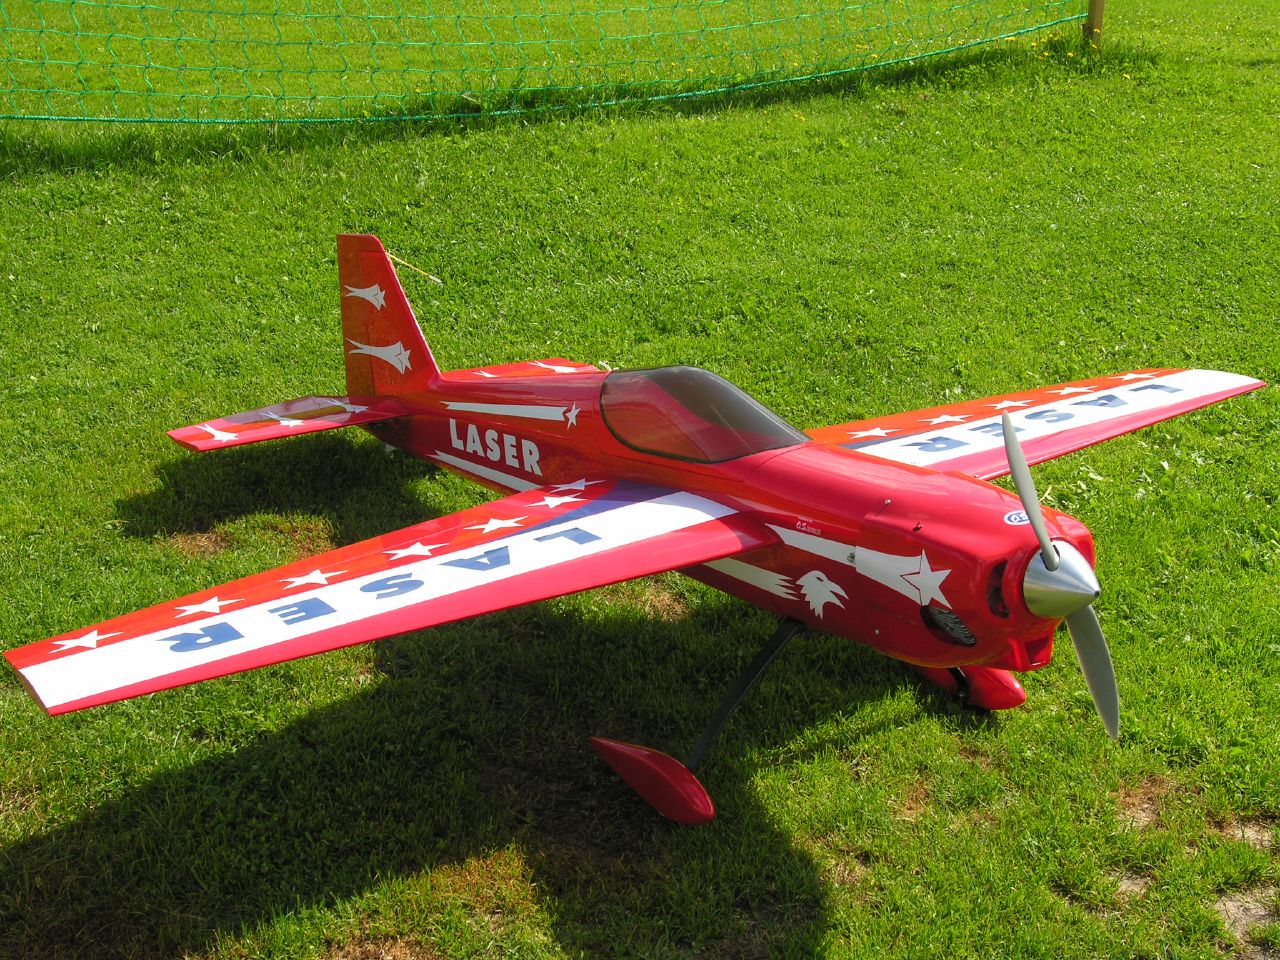 a model airplane sits in the grass near a soccer net